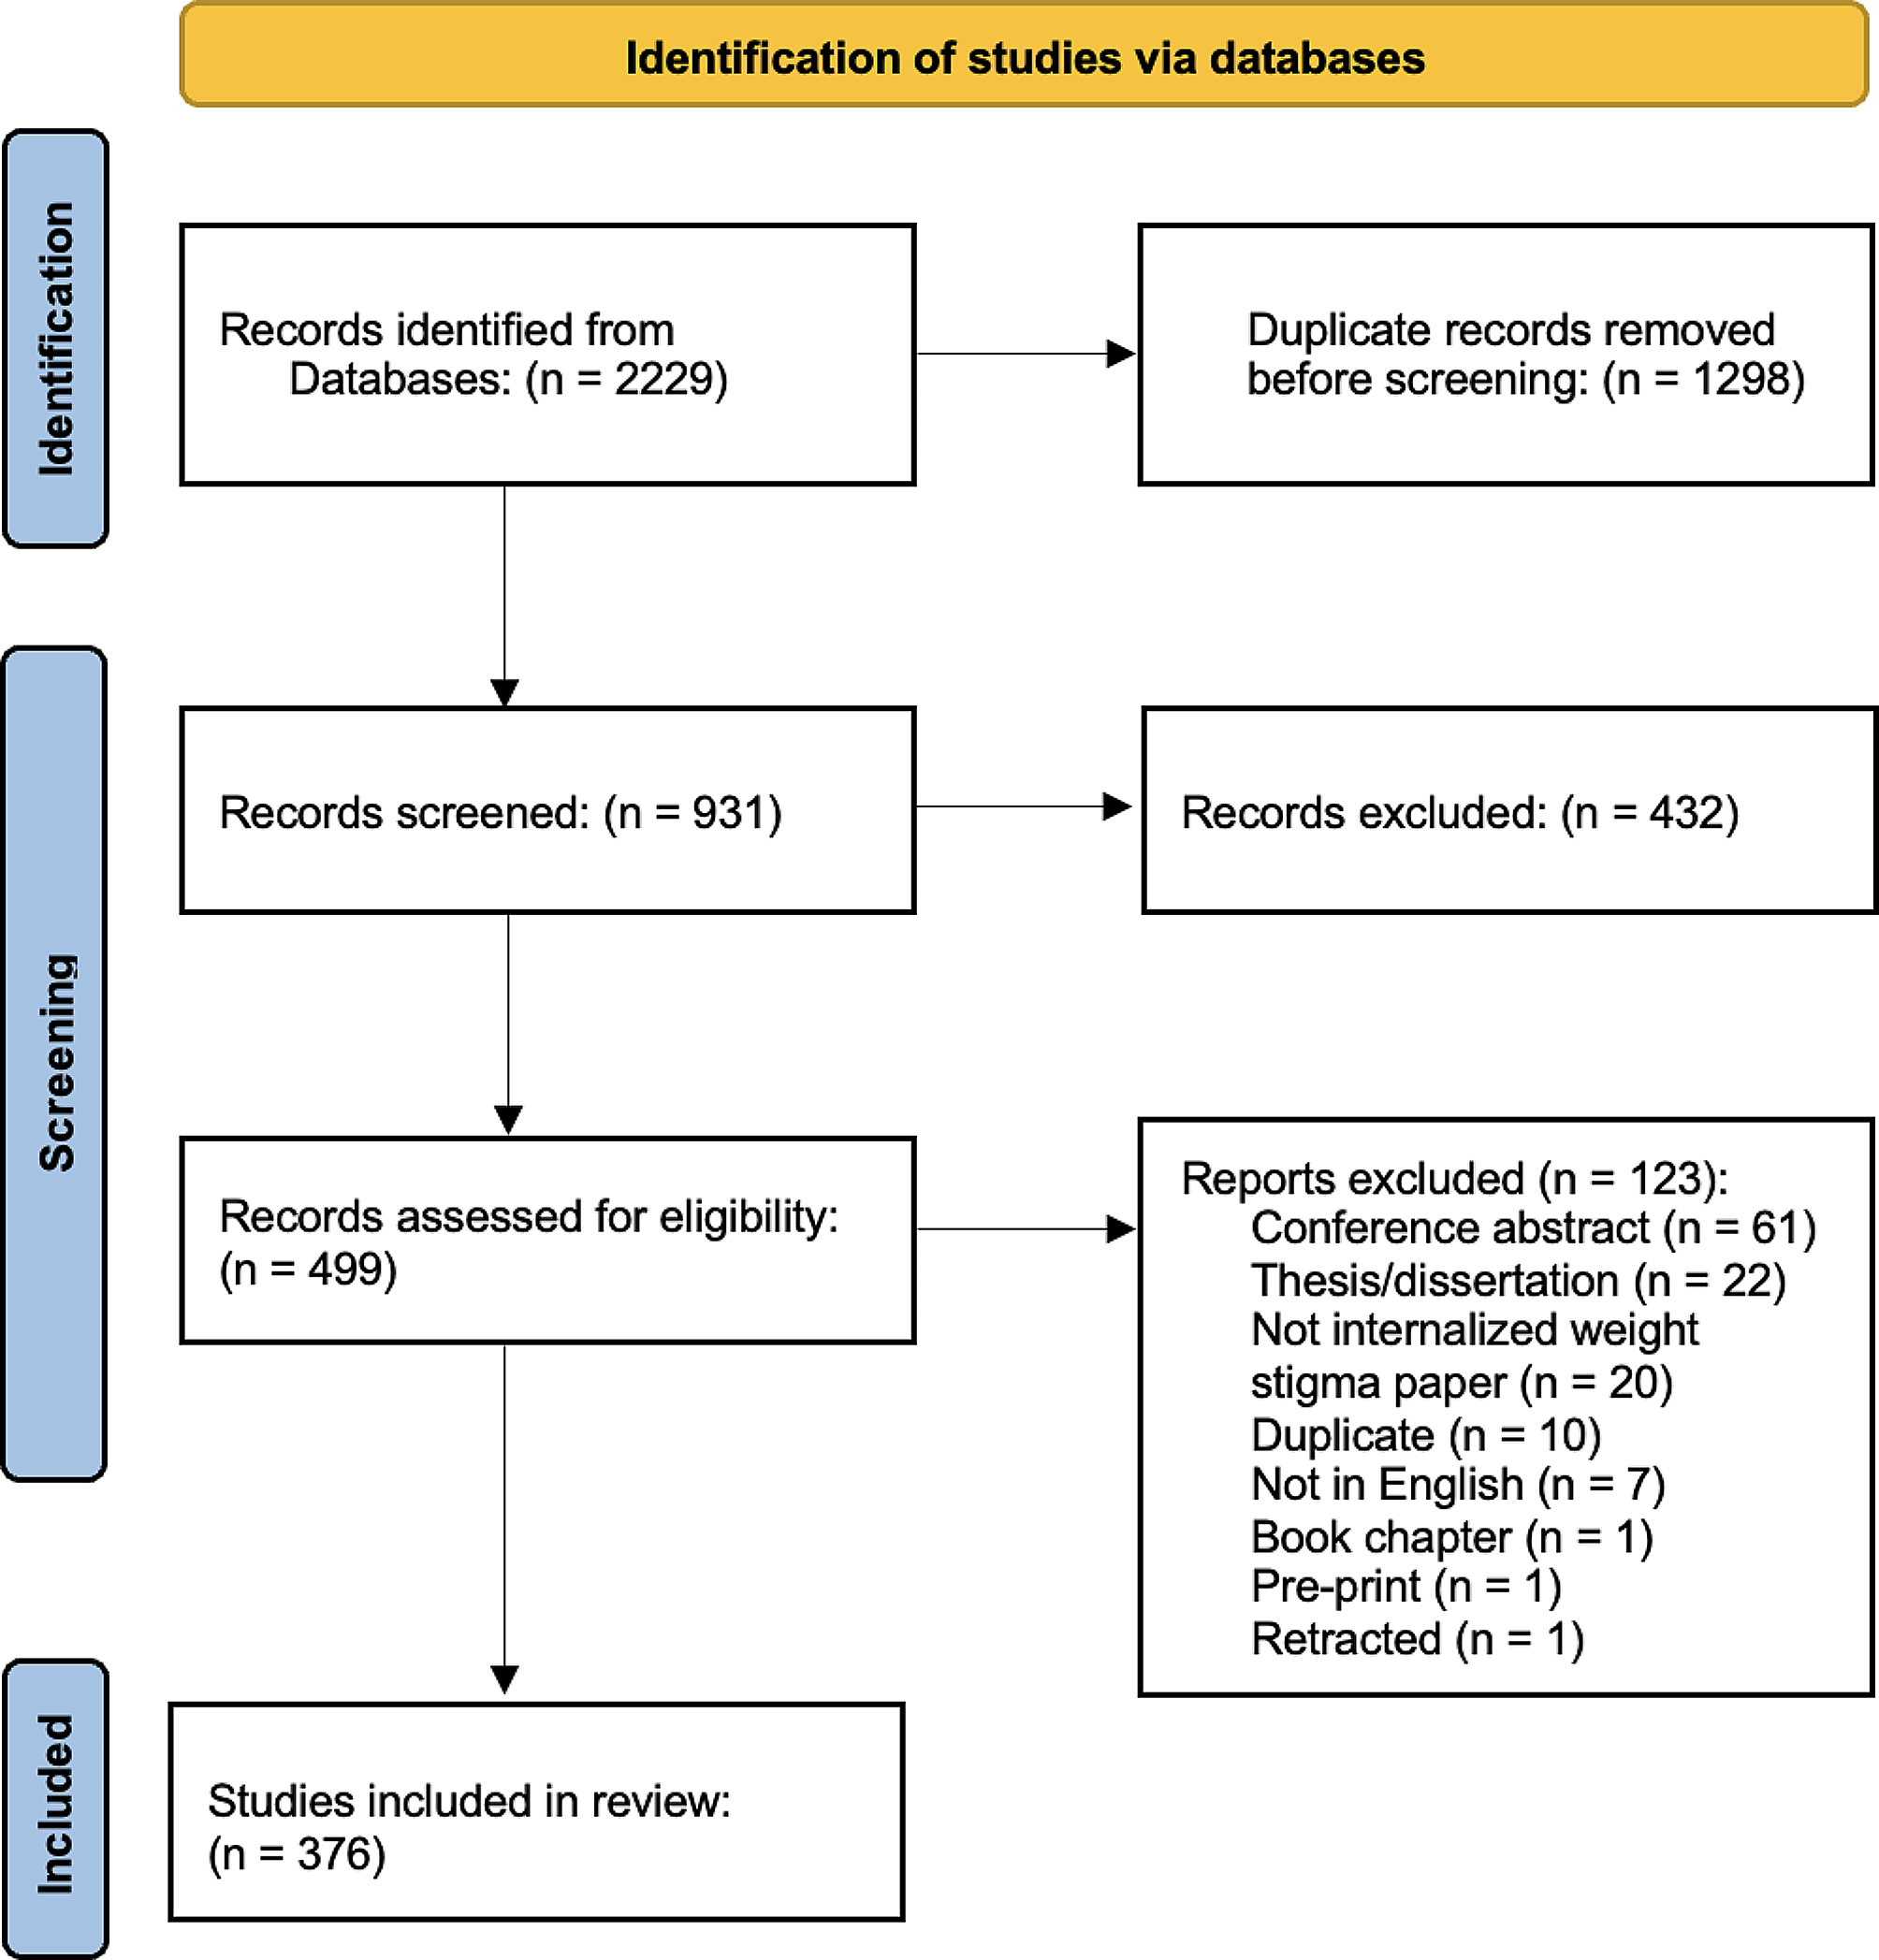 Current trends and future directions in internalized weight stigma research: a scoping review and synthesis of the literature